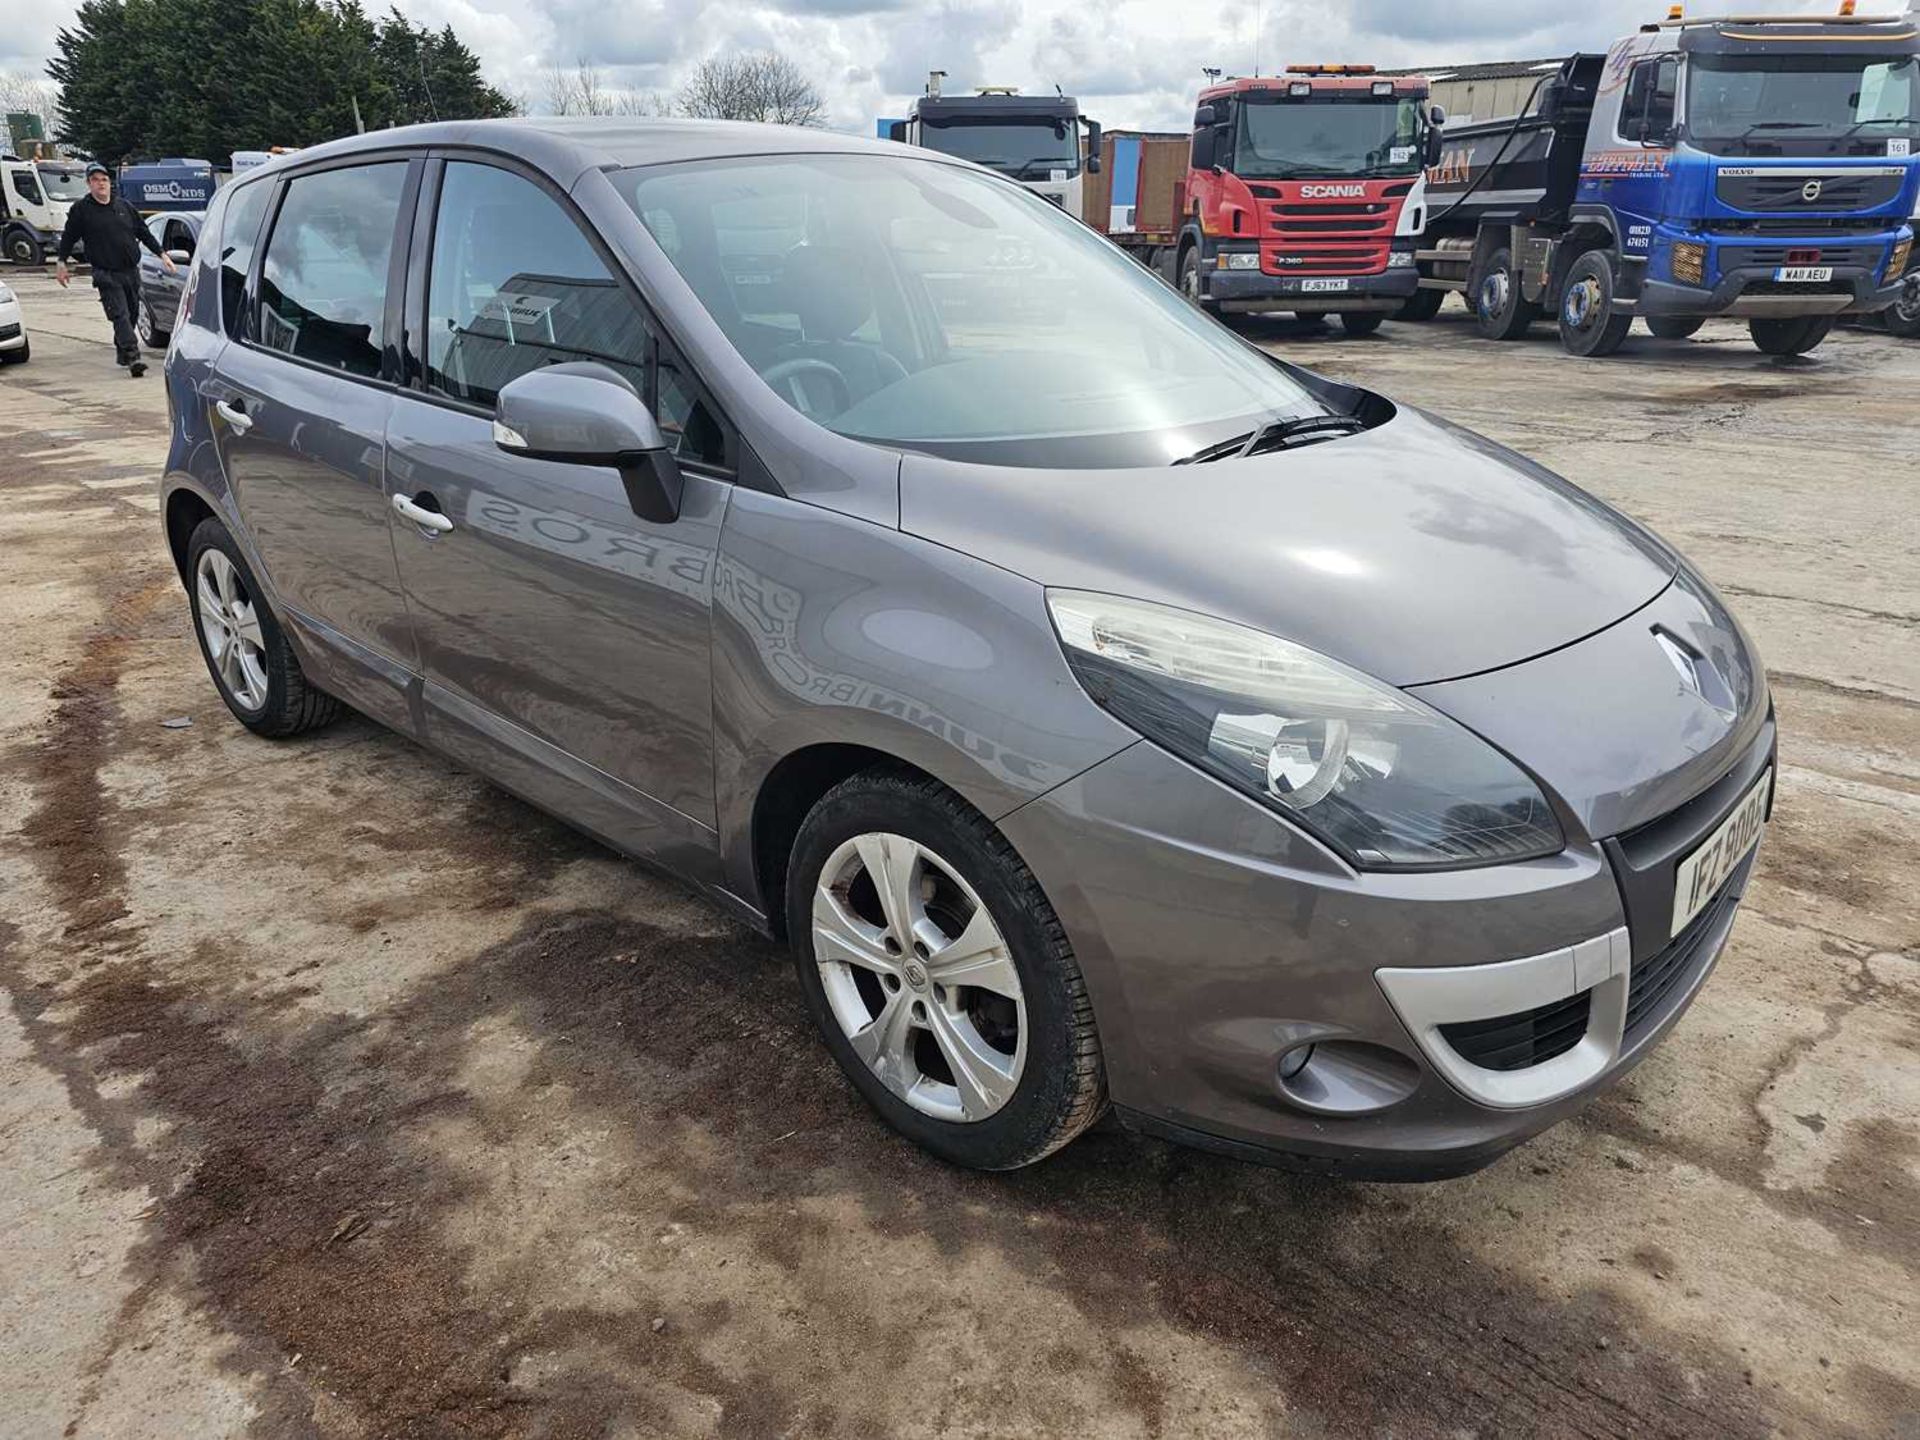 2011 Renault Scenic Dynamique Ttom, 6 Speed, Sat Nav, Bluetooth, Cruise Control, A/C (Reg. Docs. & S - Image 7 of 26